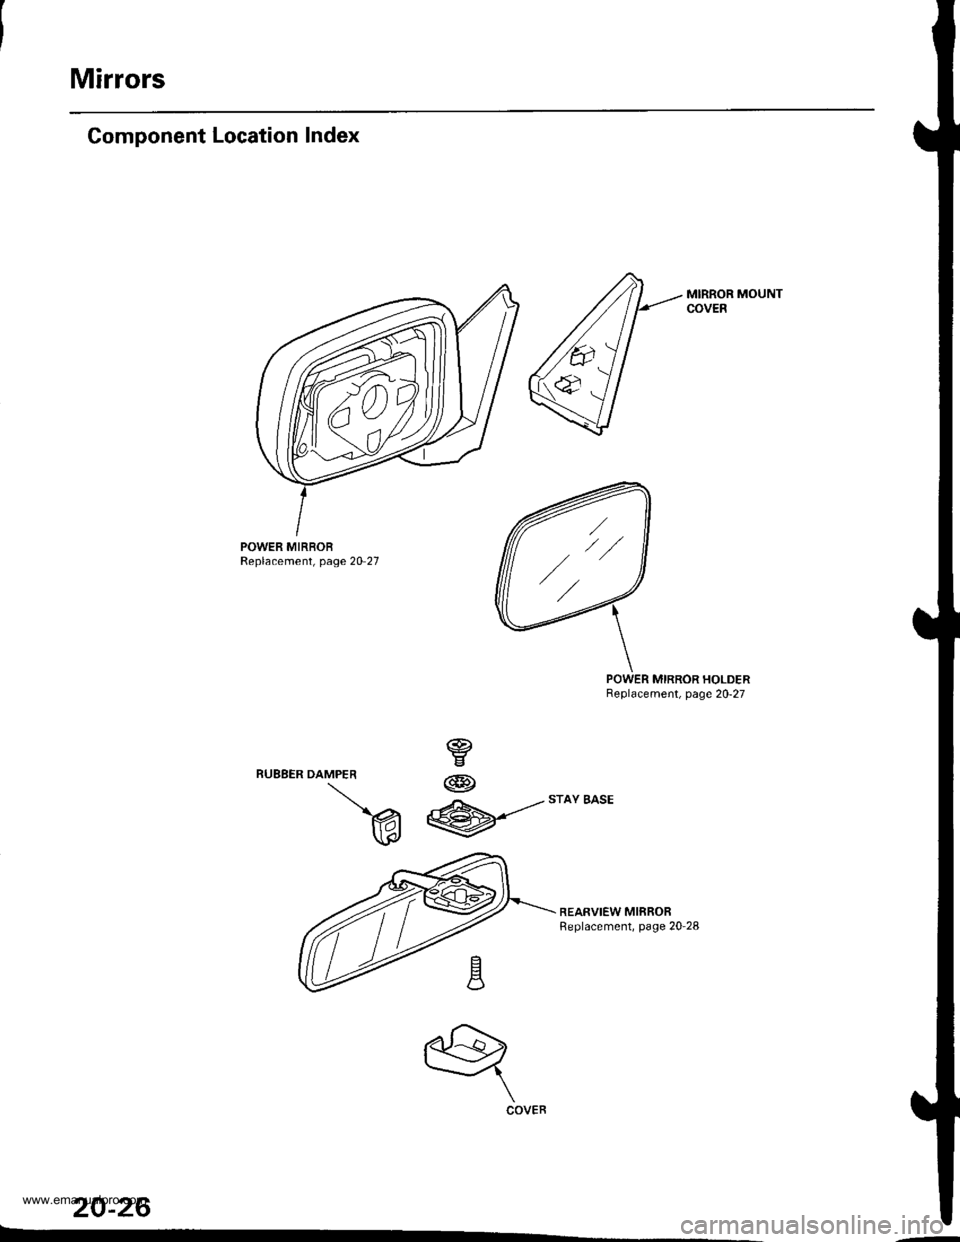 HONDA CR-V 2000 RD1-RD3 / 1.G Workshop Manual 
Mirrors
Component Location Index
MIRROR MOUNTCOVEB
POWER MIRBORReplacement, page 20 27
MIRROR HOLDERBeplacement, page 20-27
REARVIEW MIRRORReplacement, page 20-28
20-26
DAMPER
v
W
@
@
w
q
COVER
,//
w